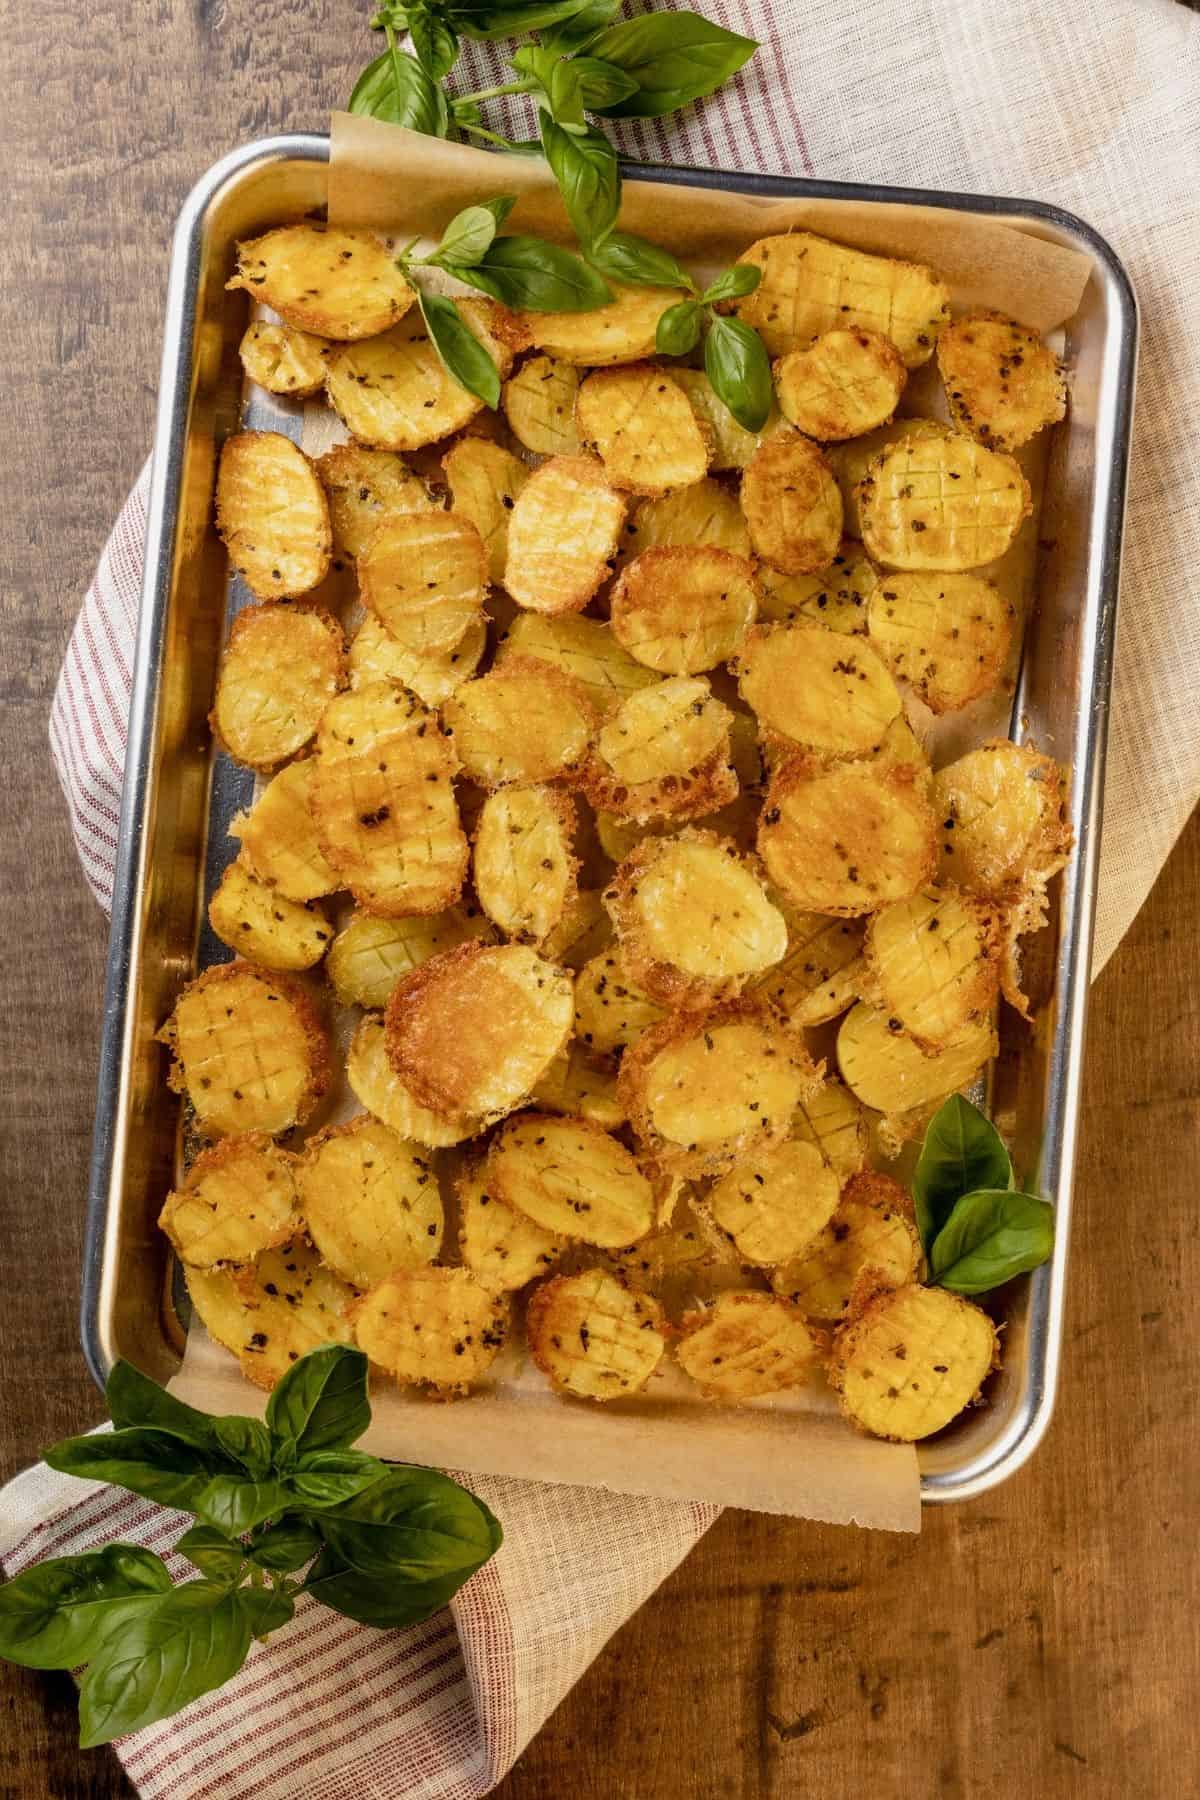 parmesan potatoes with fresh basil on a baking sheet on a wood table. a red and white towel is under the baking sheet.